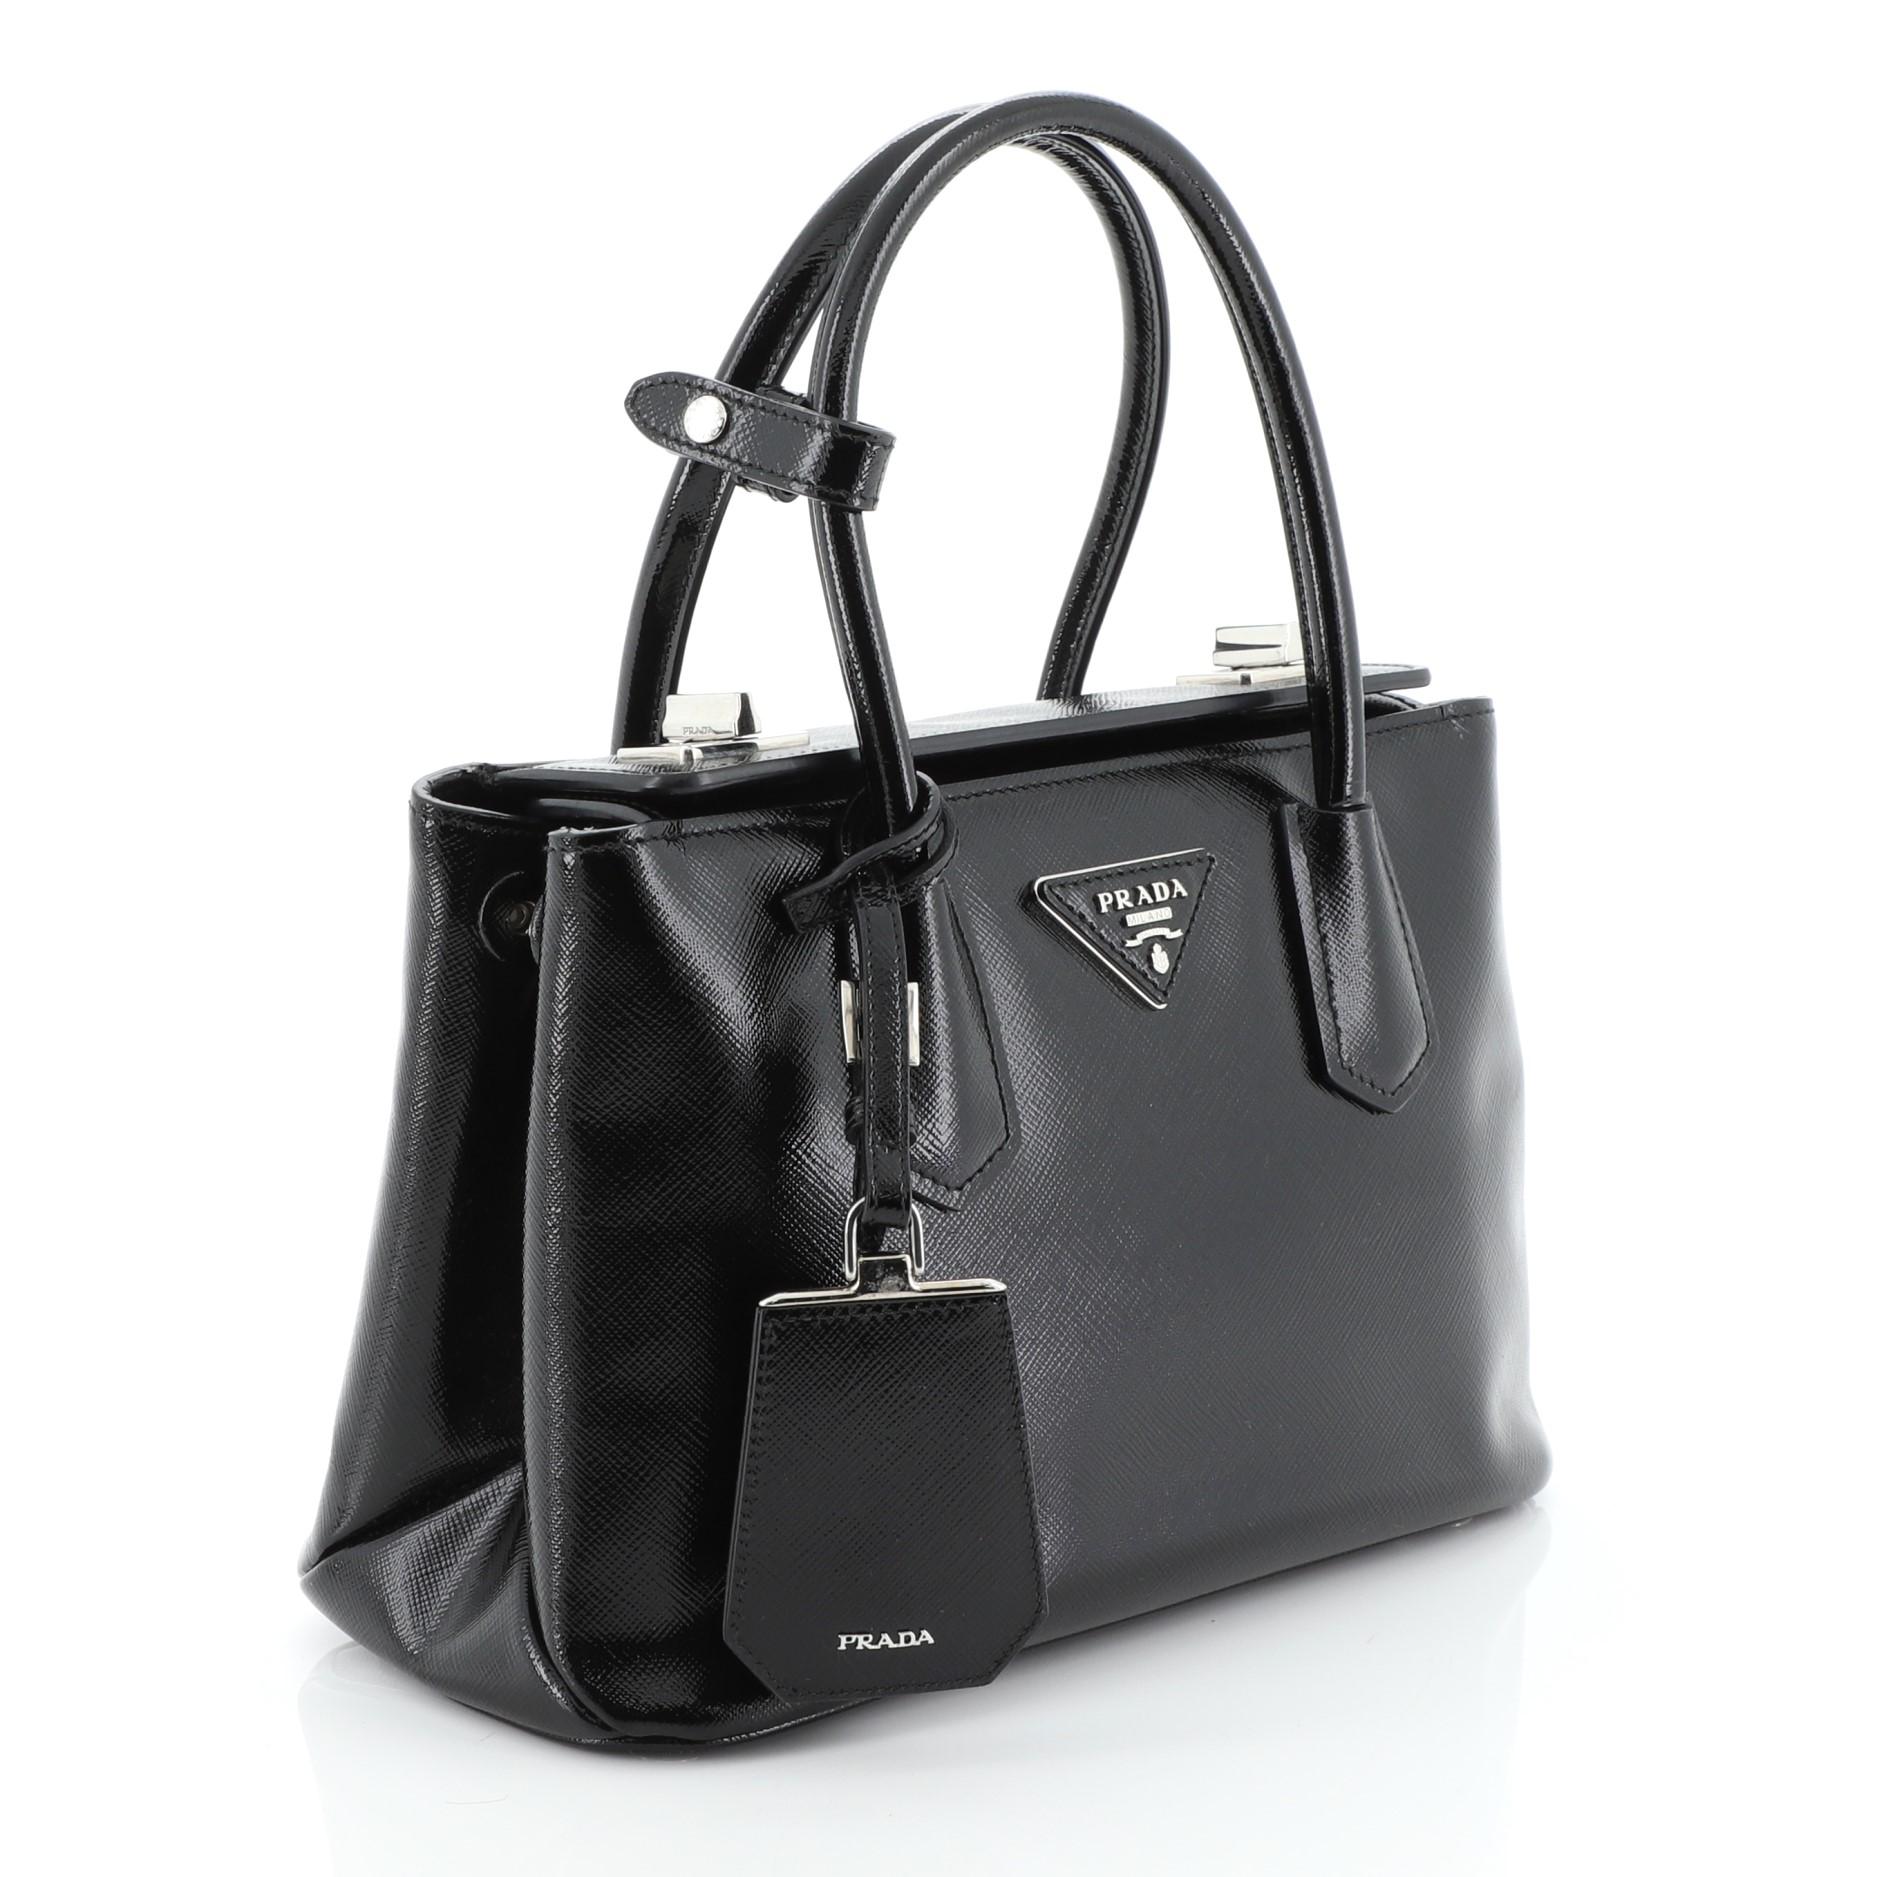 This Prada Turnlock Cuir Twin Tote Vernice Saffiano Leather Mini, crafted in black vernice saffiano leather, features dual rolled leather handles, protective base studs, and silver-tone hardware. Its dual turn-lock closure opens to a red leather